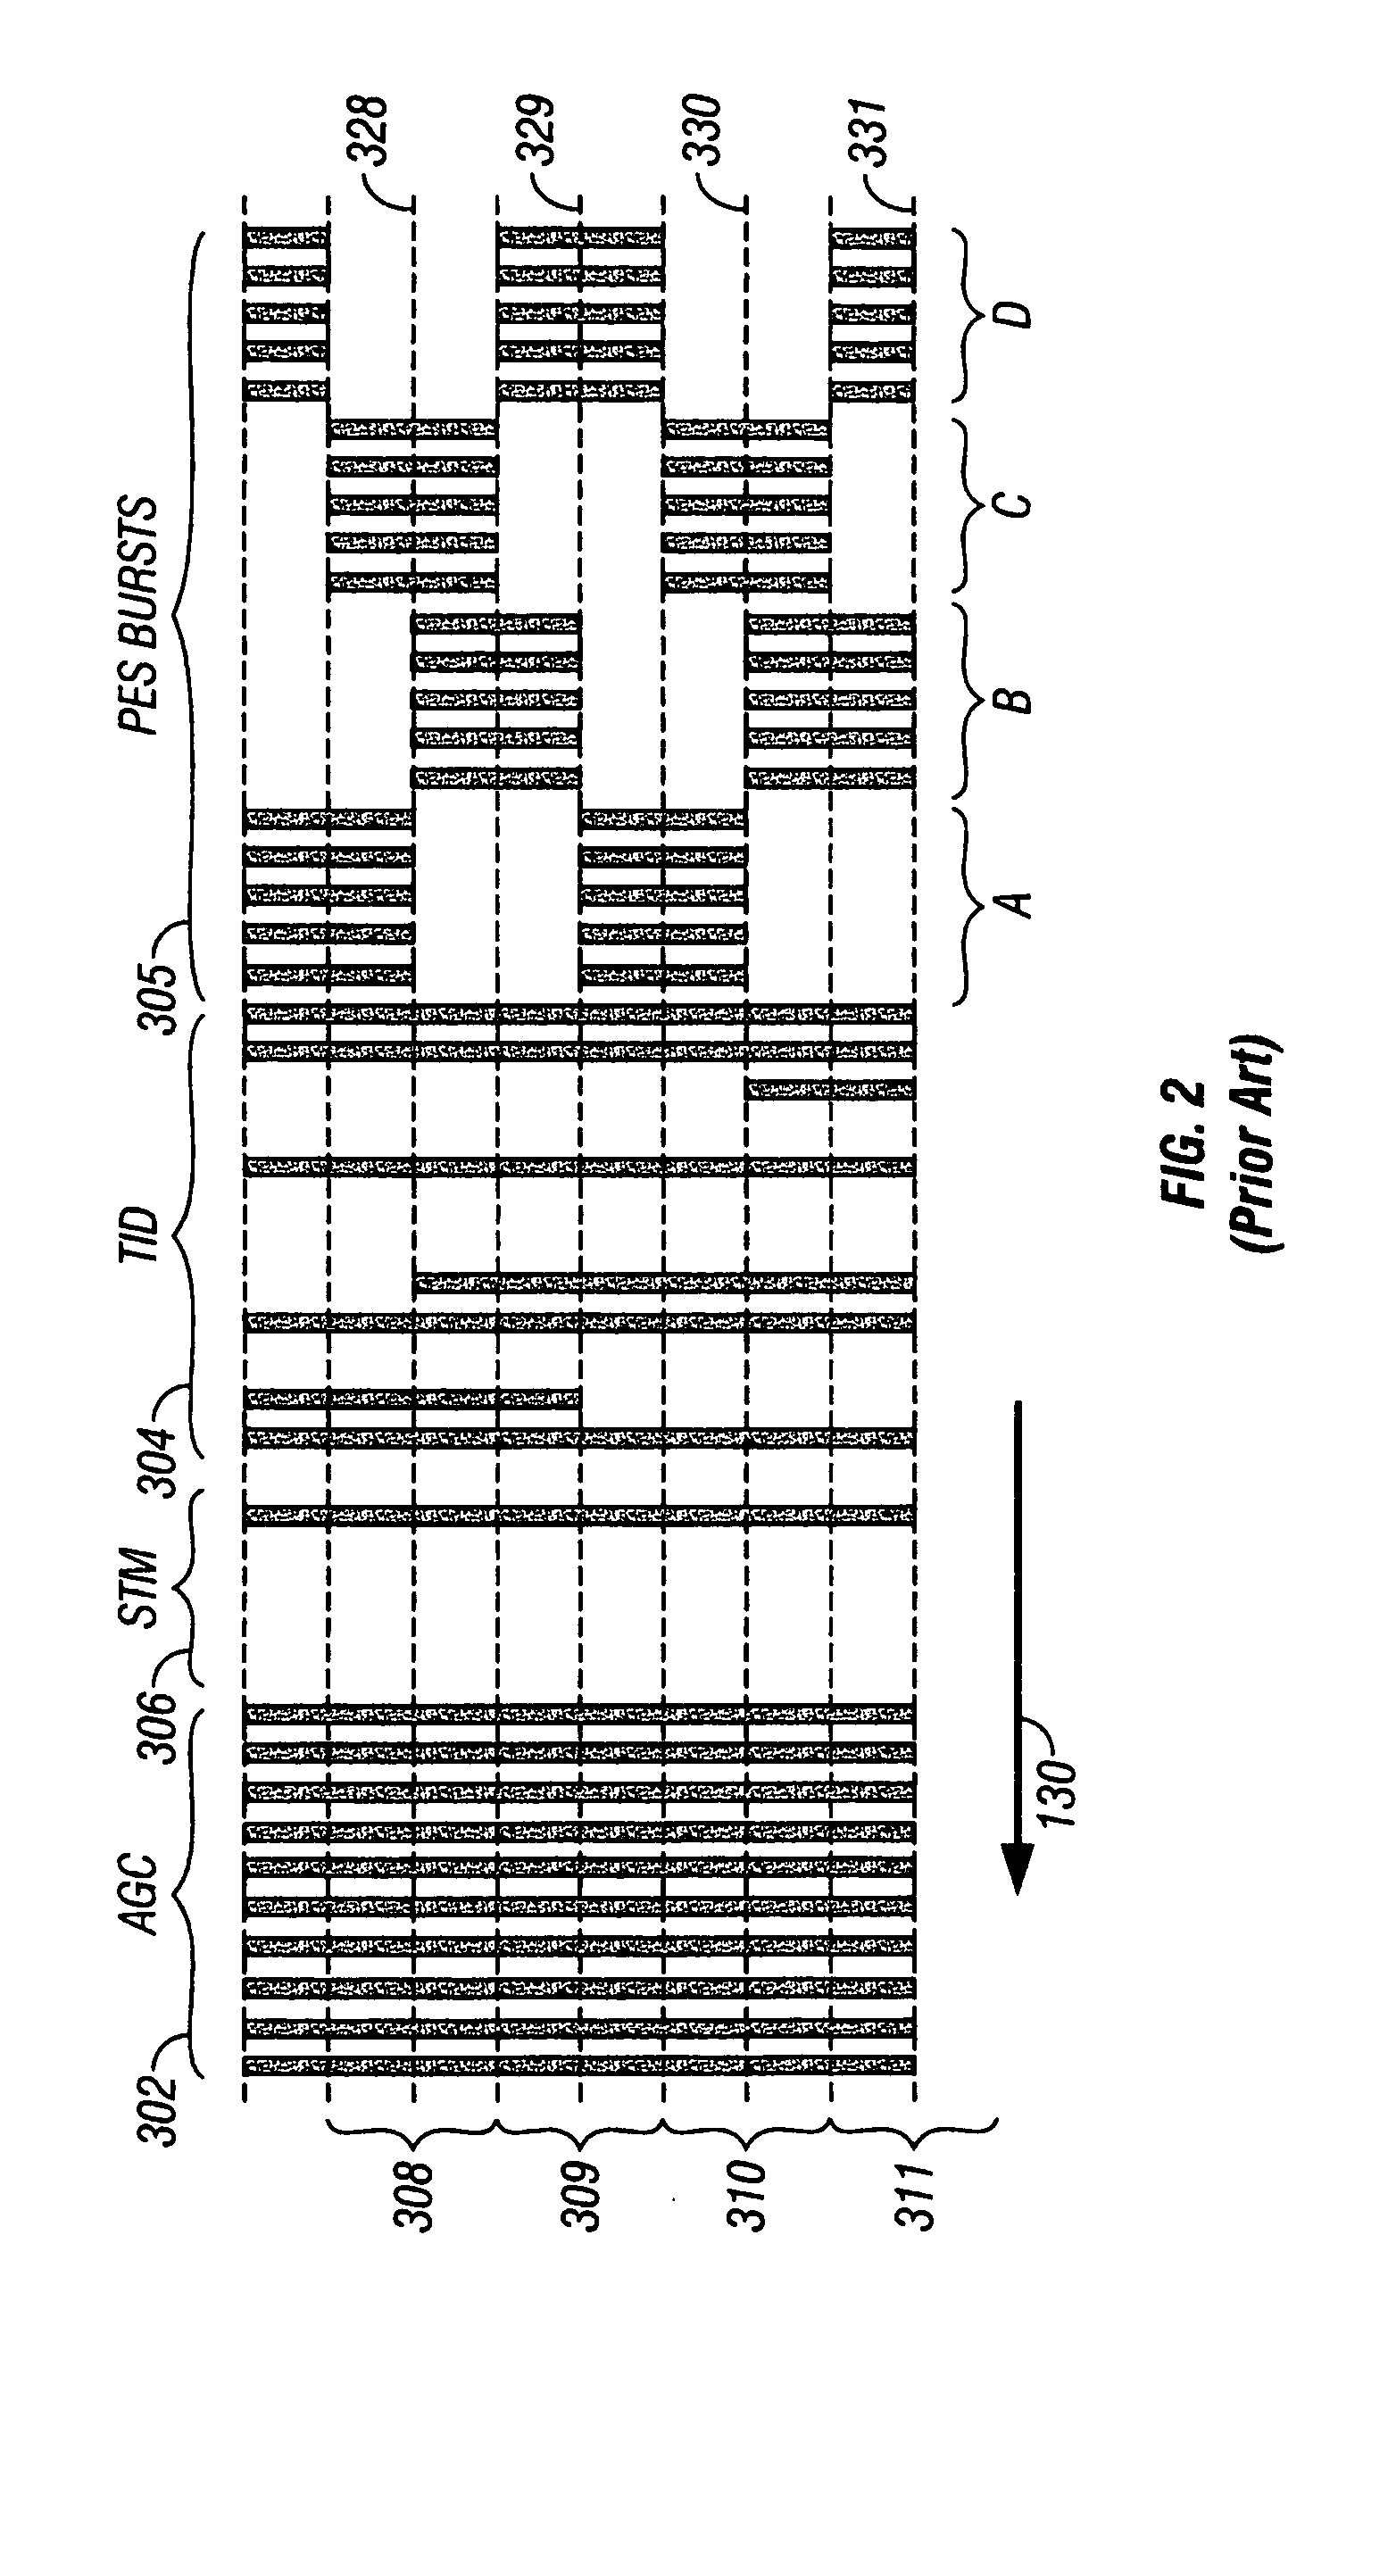 Magnetic recording disk drive with dual-stage actuator and control system with multiple controllers